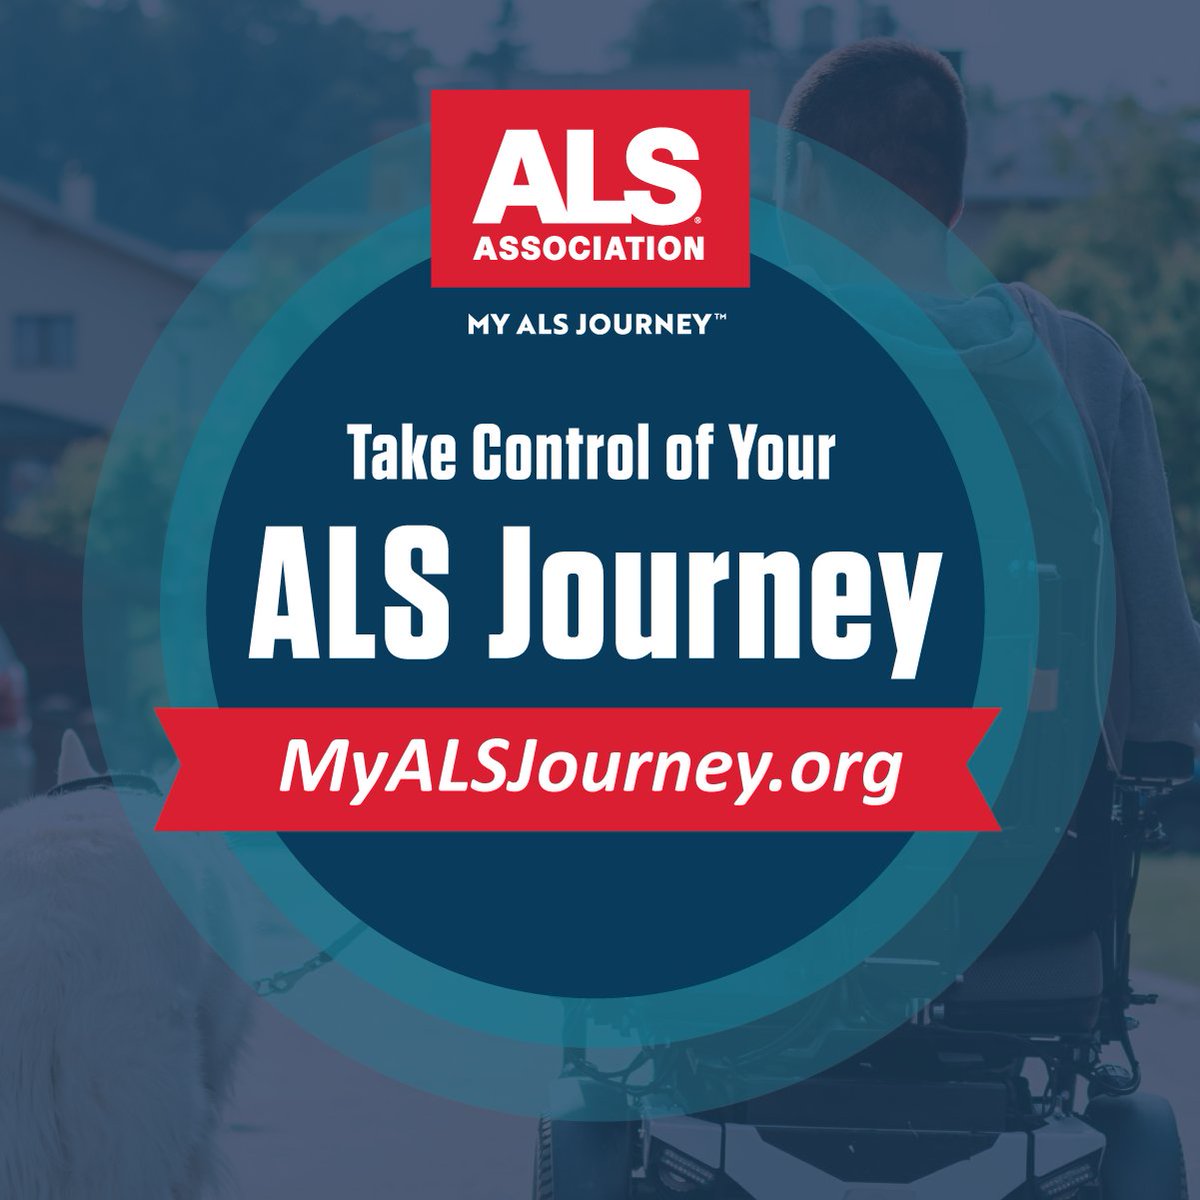 My ALS Journey™ is an interactive, web-based tool that allows people with ALS to take control of their journey. Users can browse articles, view videos, and find other helpful information specific to any stage of their disease. Get Started: myalsjourney.org